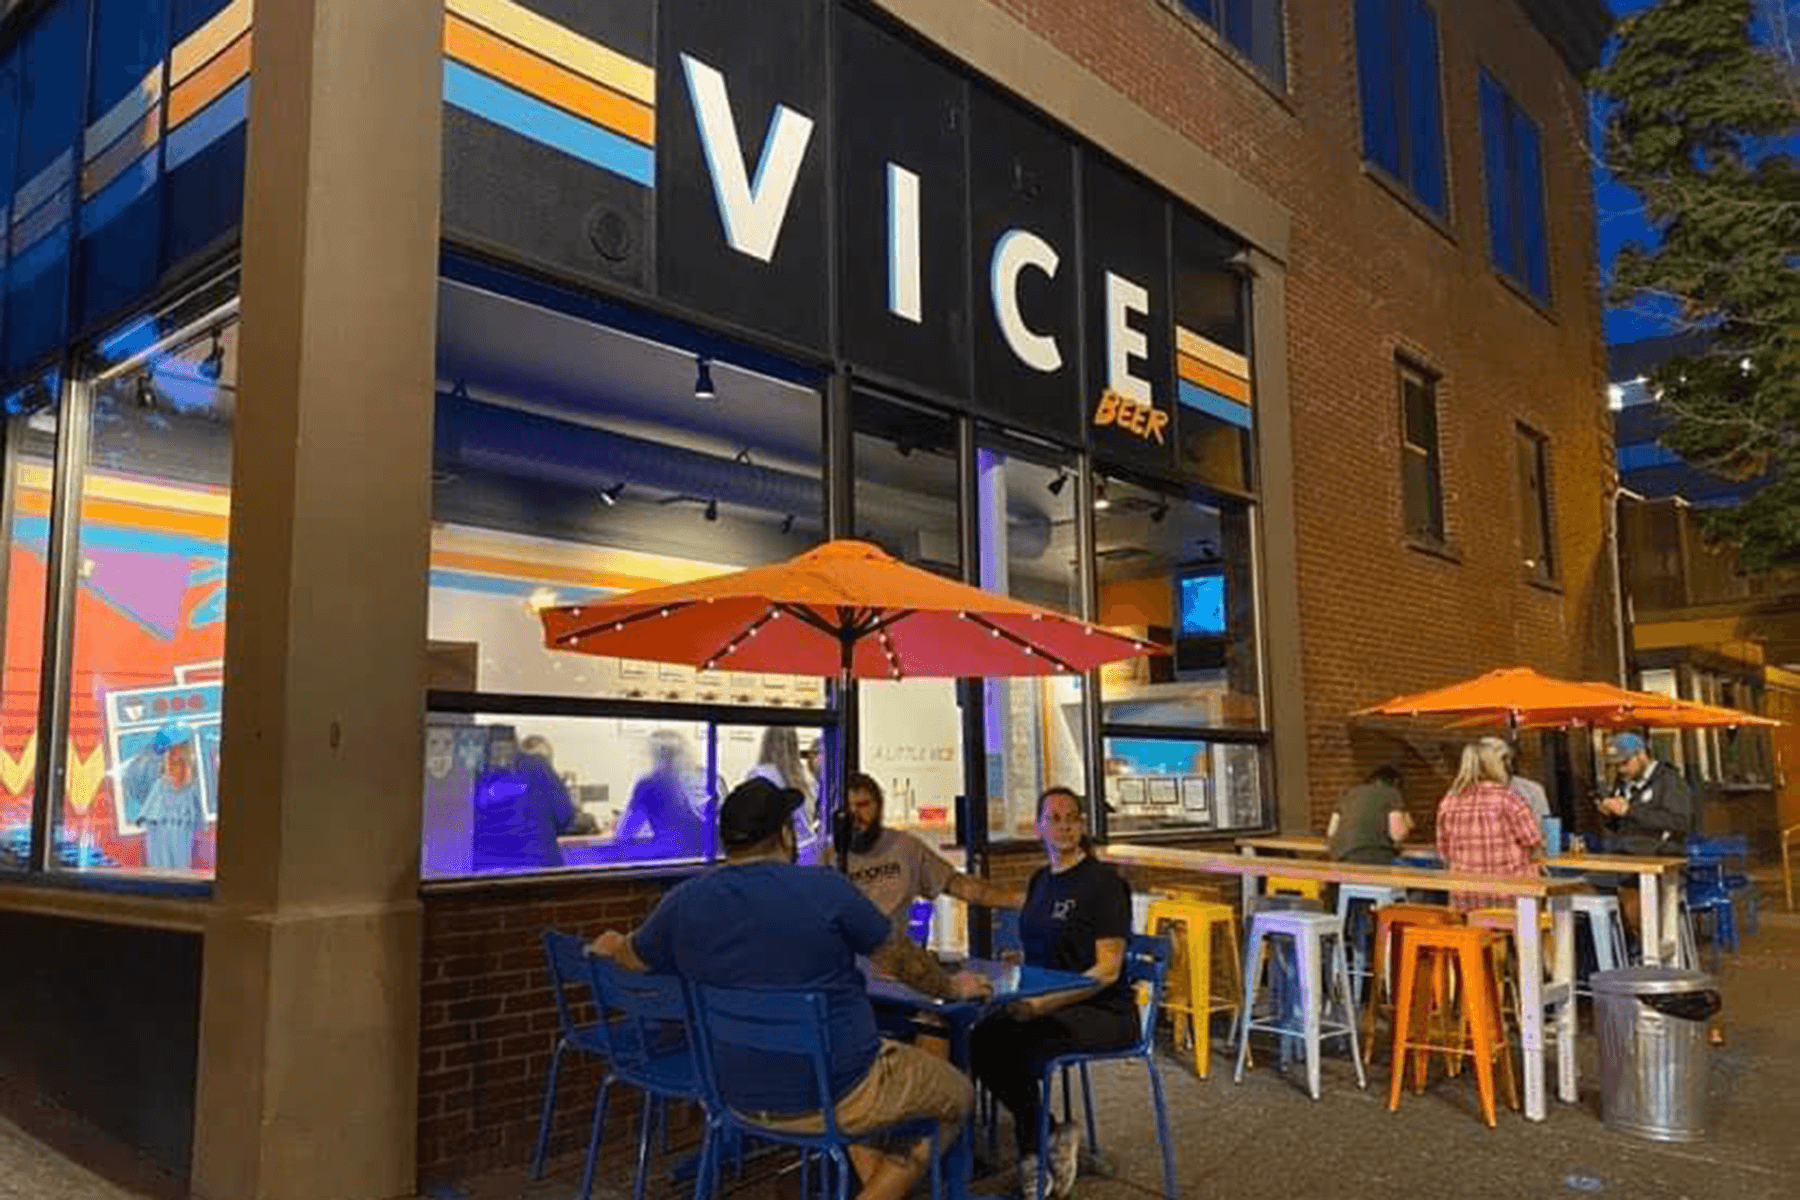 Vice Beer downtown taproom in Vancouver, WA.